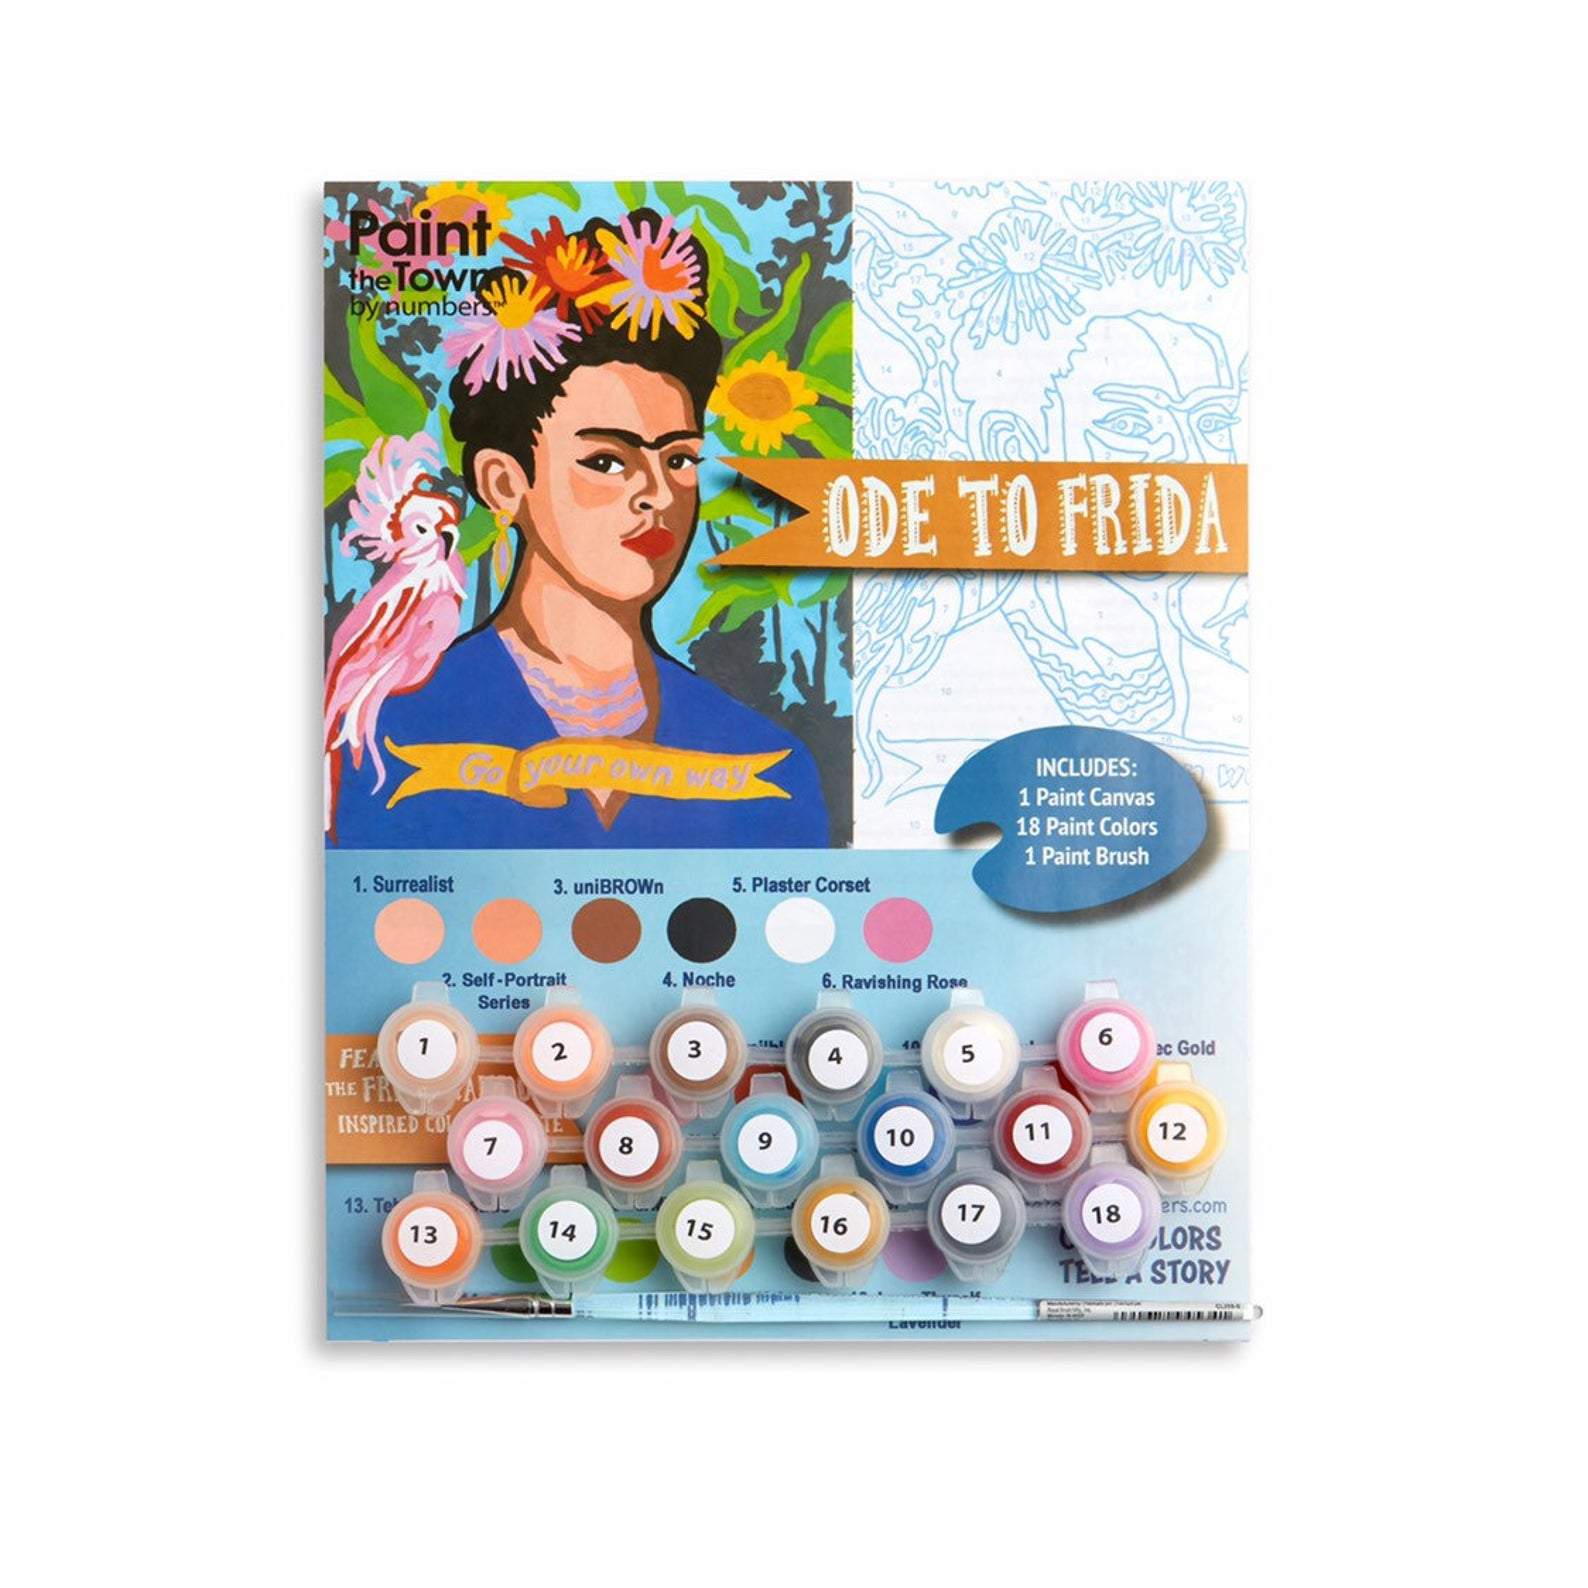 Ode to Frida Paint By Number Kit